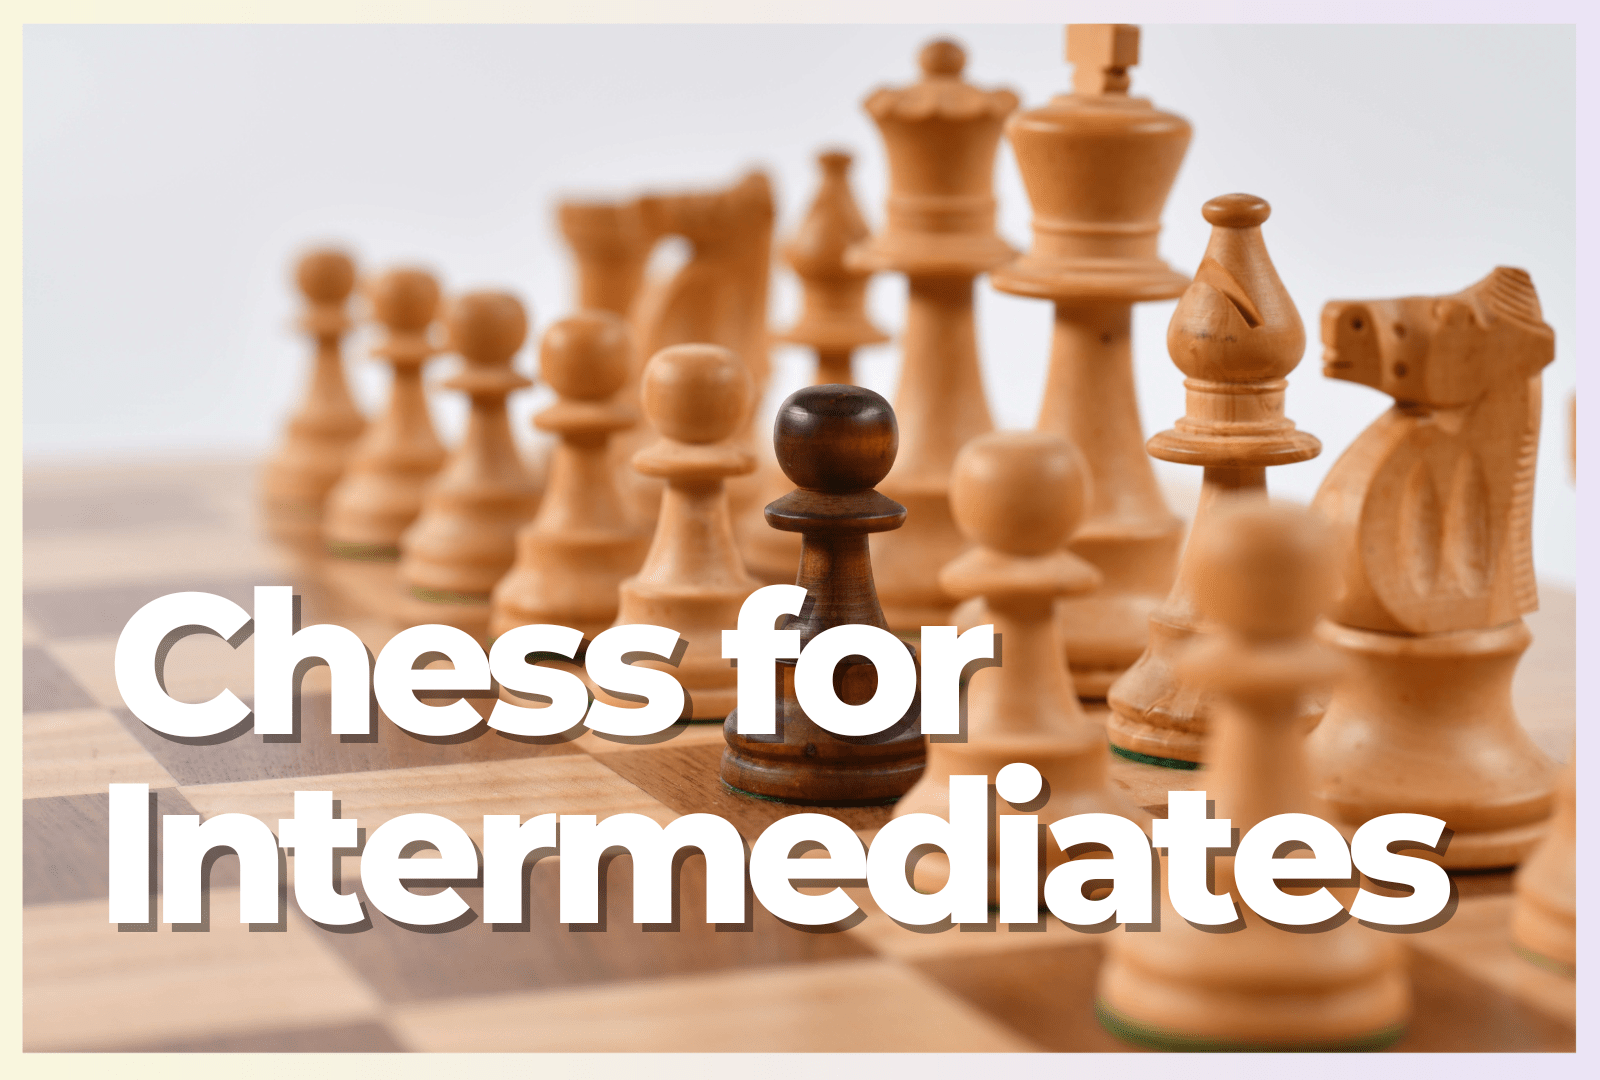 A Chess board and pieces up close with the text 'Chess for Intermediates' overlaid.